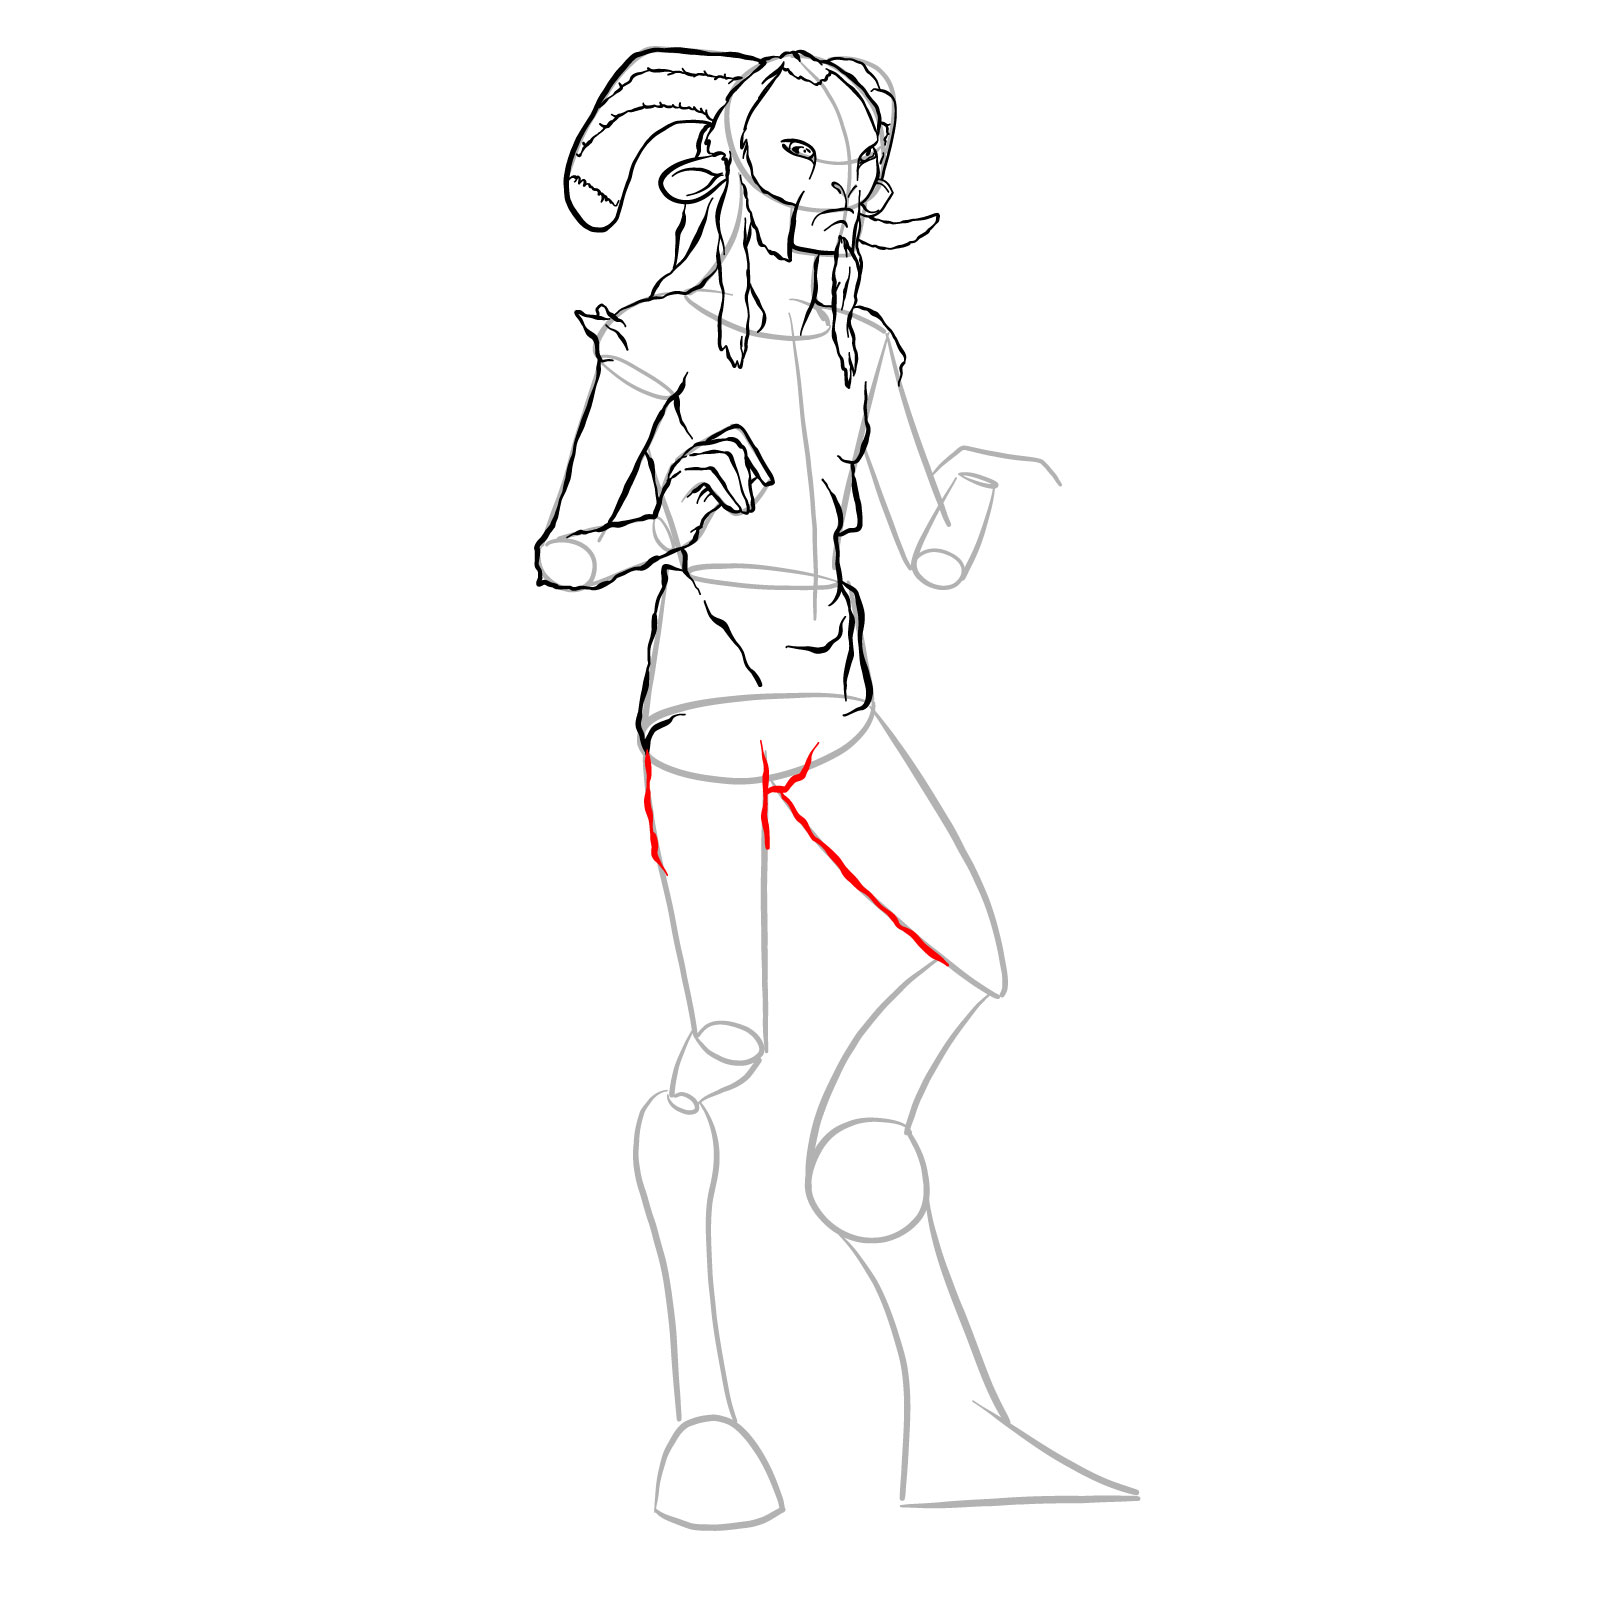 How to draw a Faun - step 22